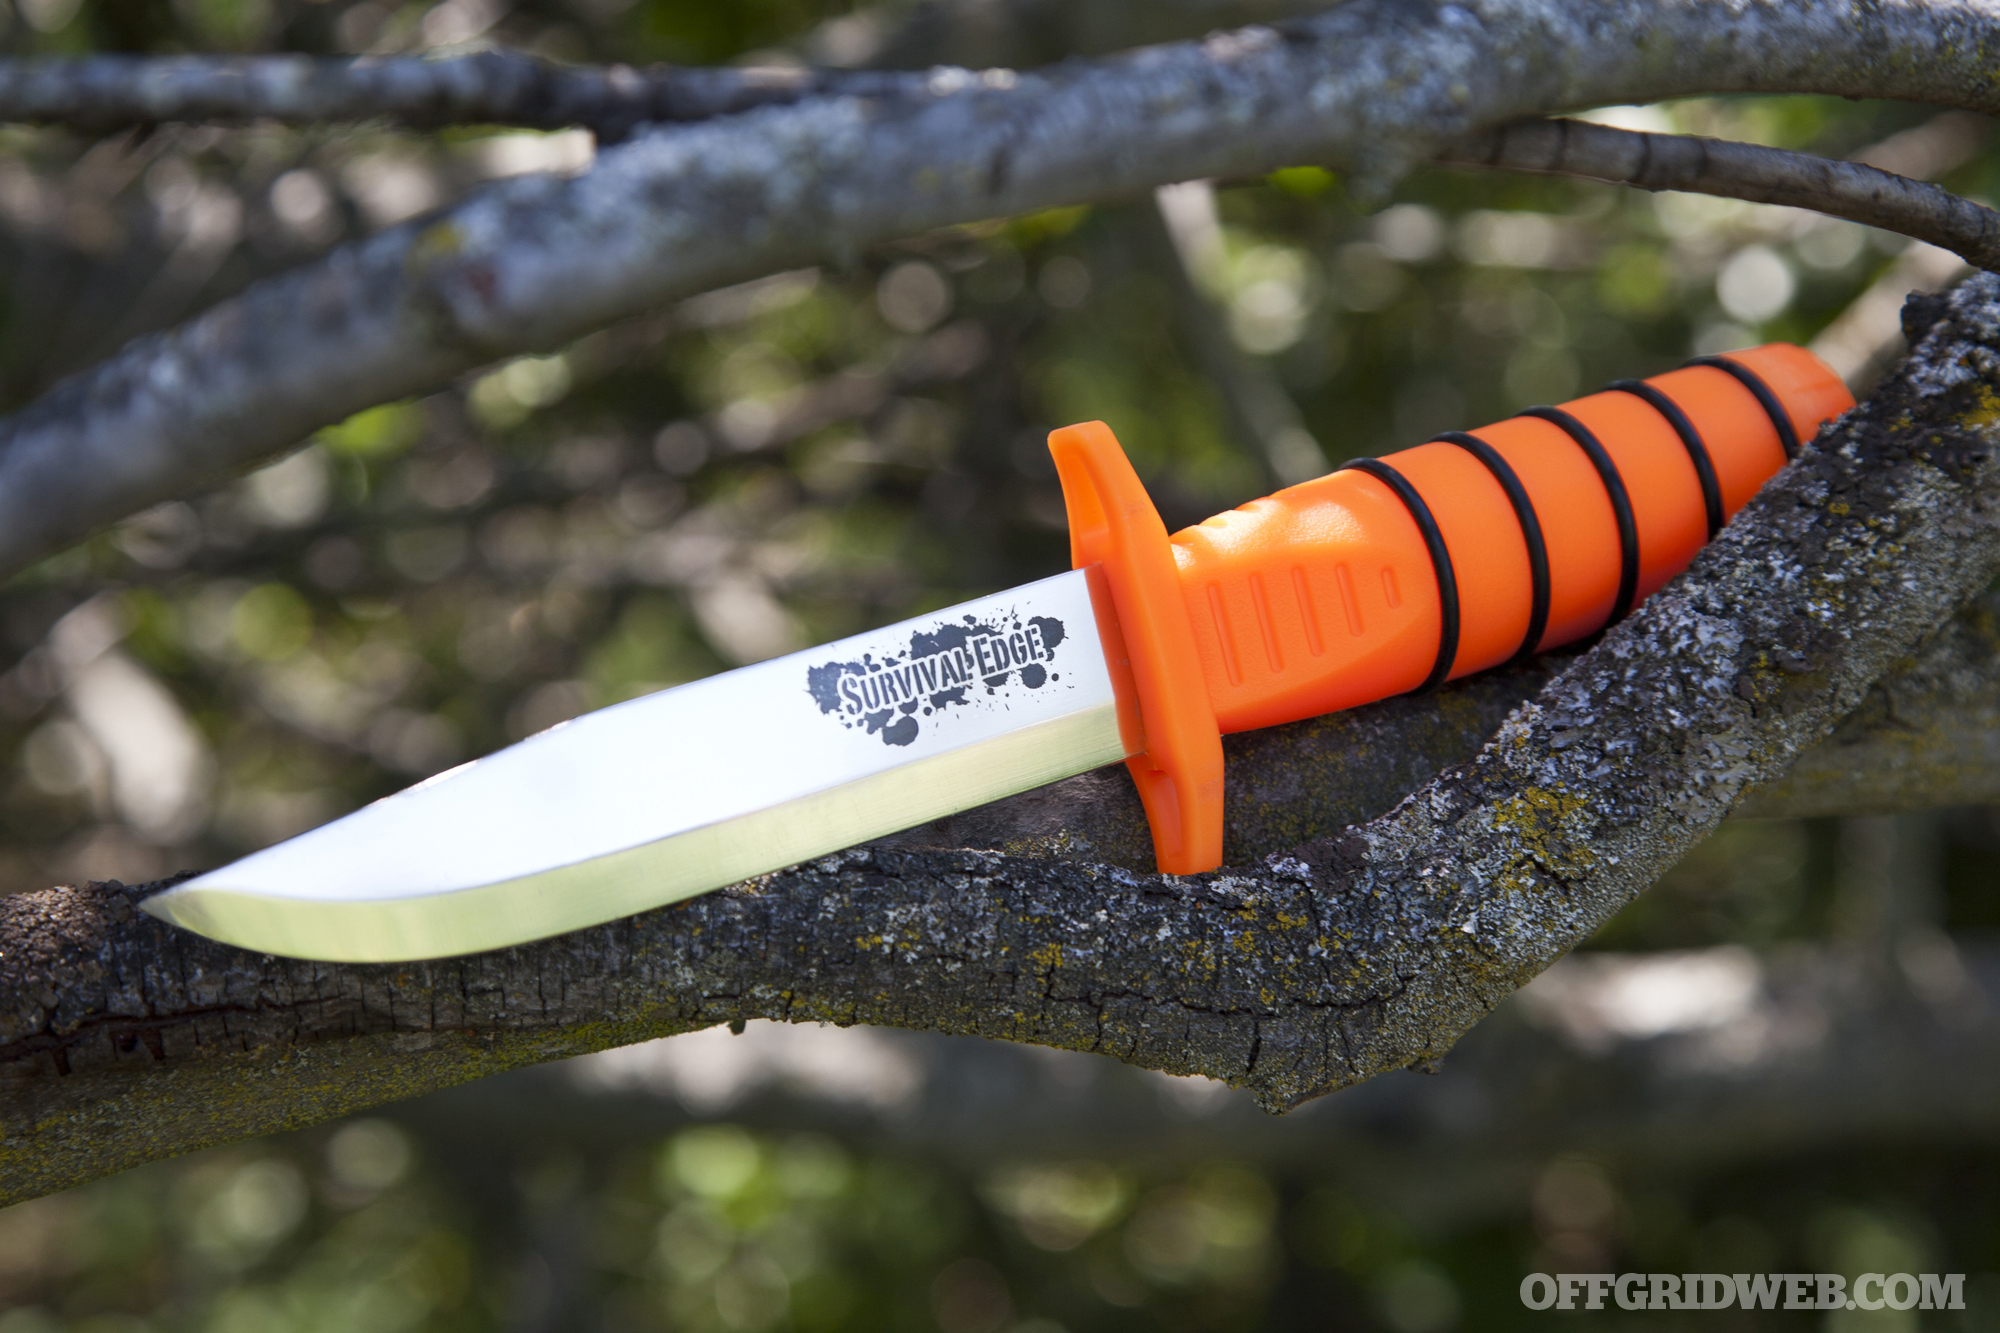 Review: Cold Steel Survival Edge Knife